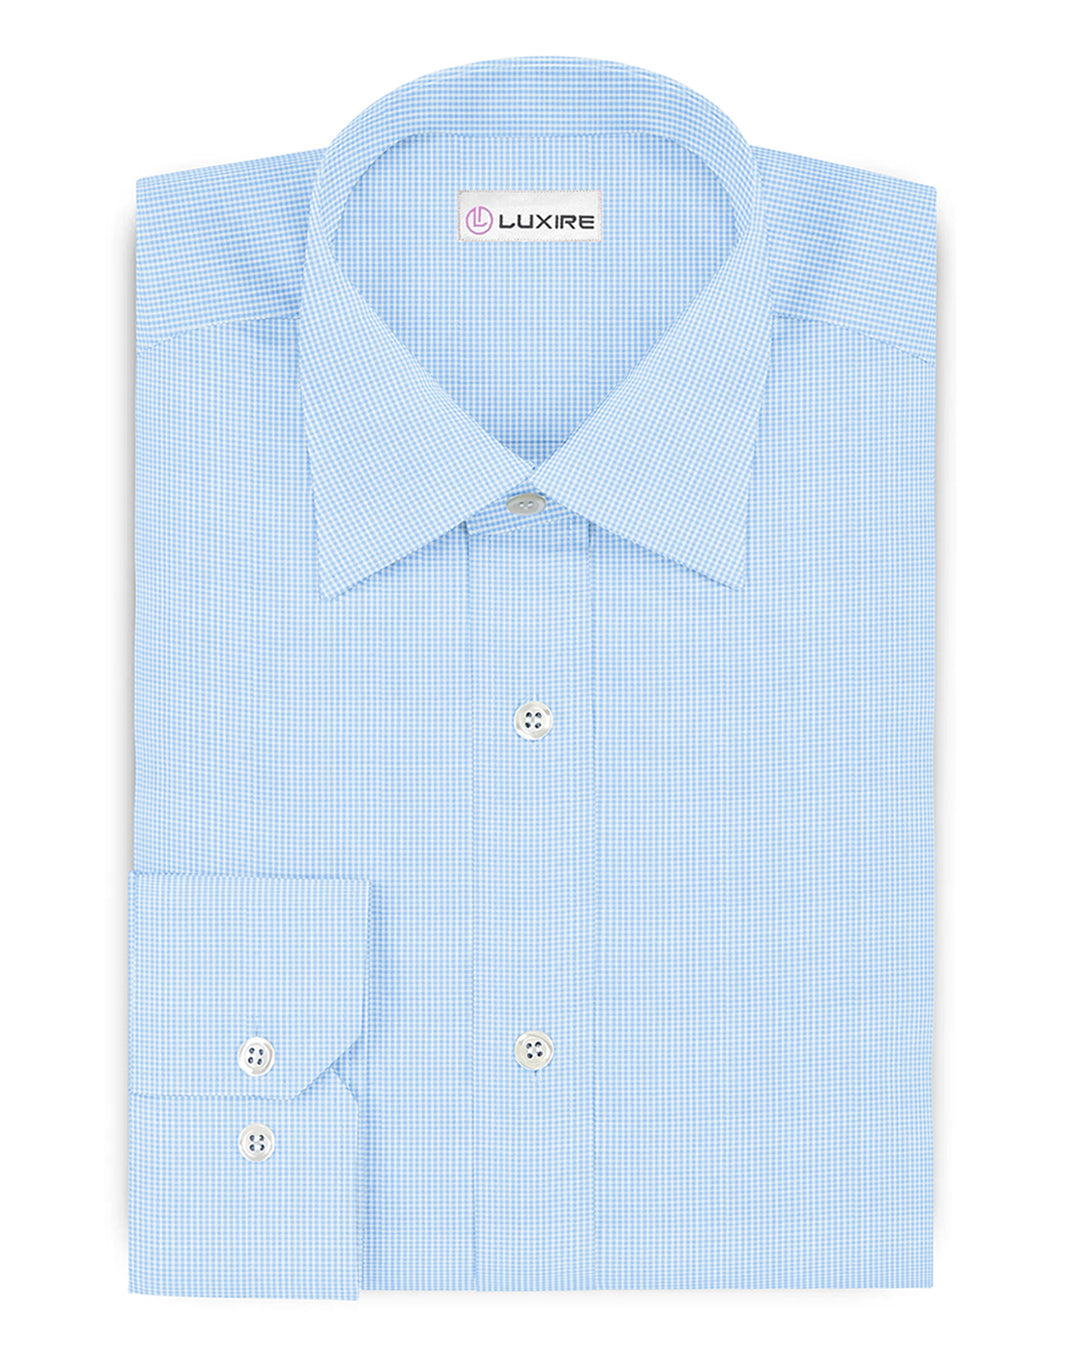 The Finest - Luxire Blue Gingham 300/4